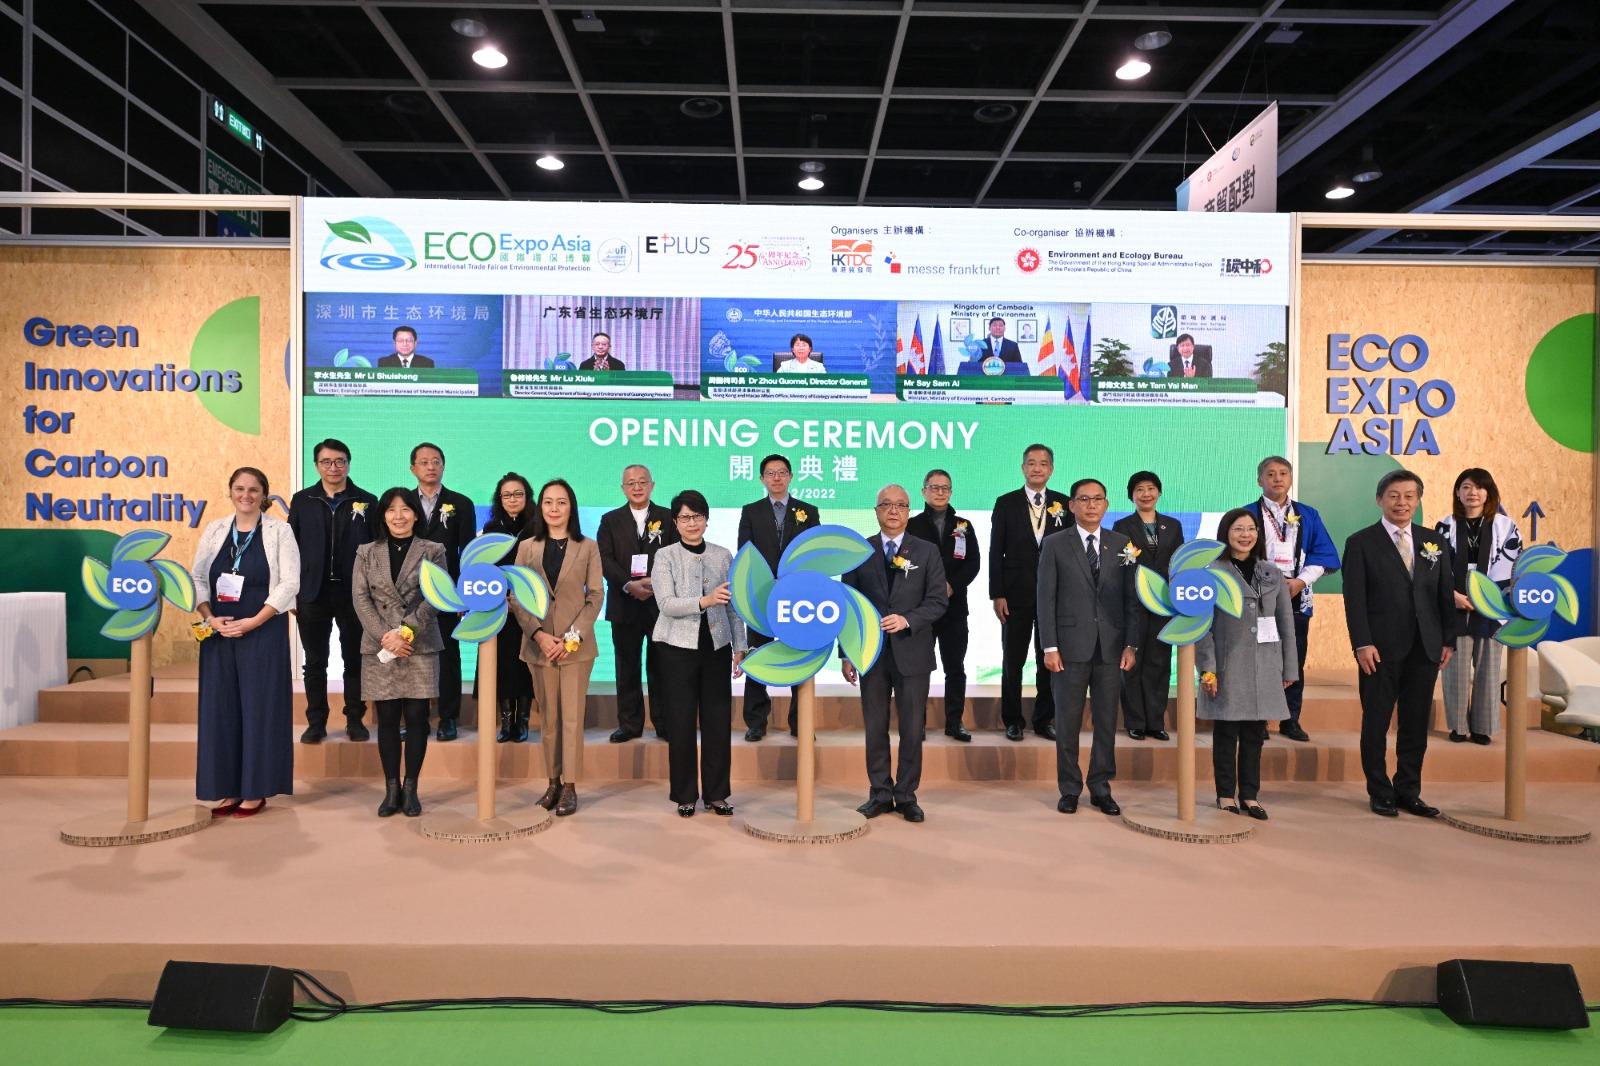 The Secretary for Environment and Ecology, Mr Tse Chin-wan (front row, fourth right), officiates with other guests at the opening ceremony of the 17th Eco Expo Asia at the Hong Kong Convention and Exhibition Centre today (December 14).

